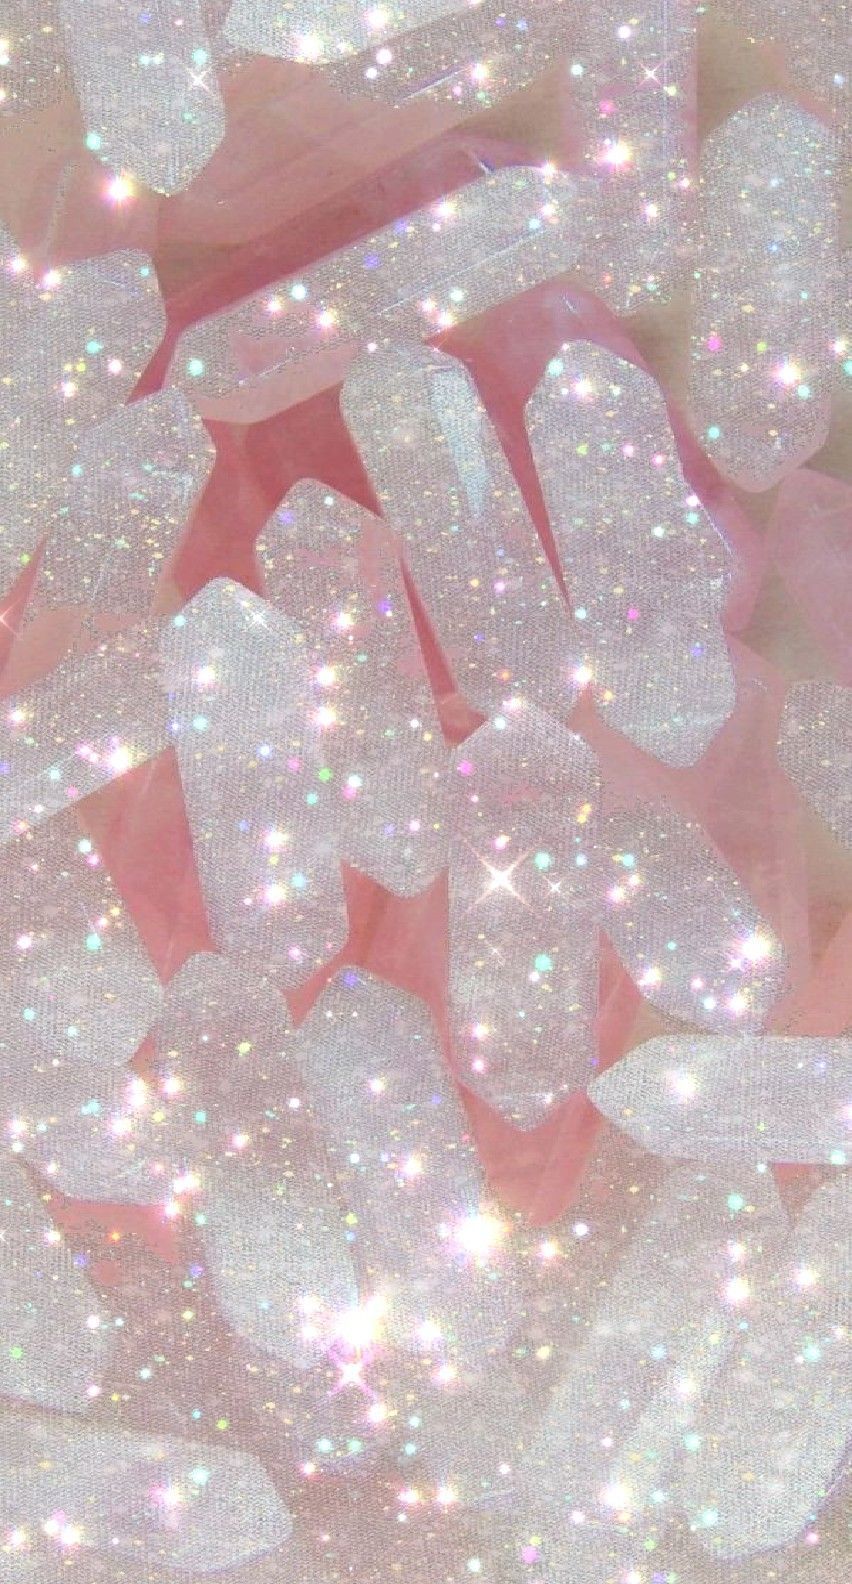 Girly wallpaper for phone with glitter and pink roses - Glitter, diamond